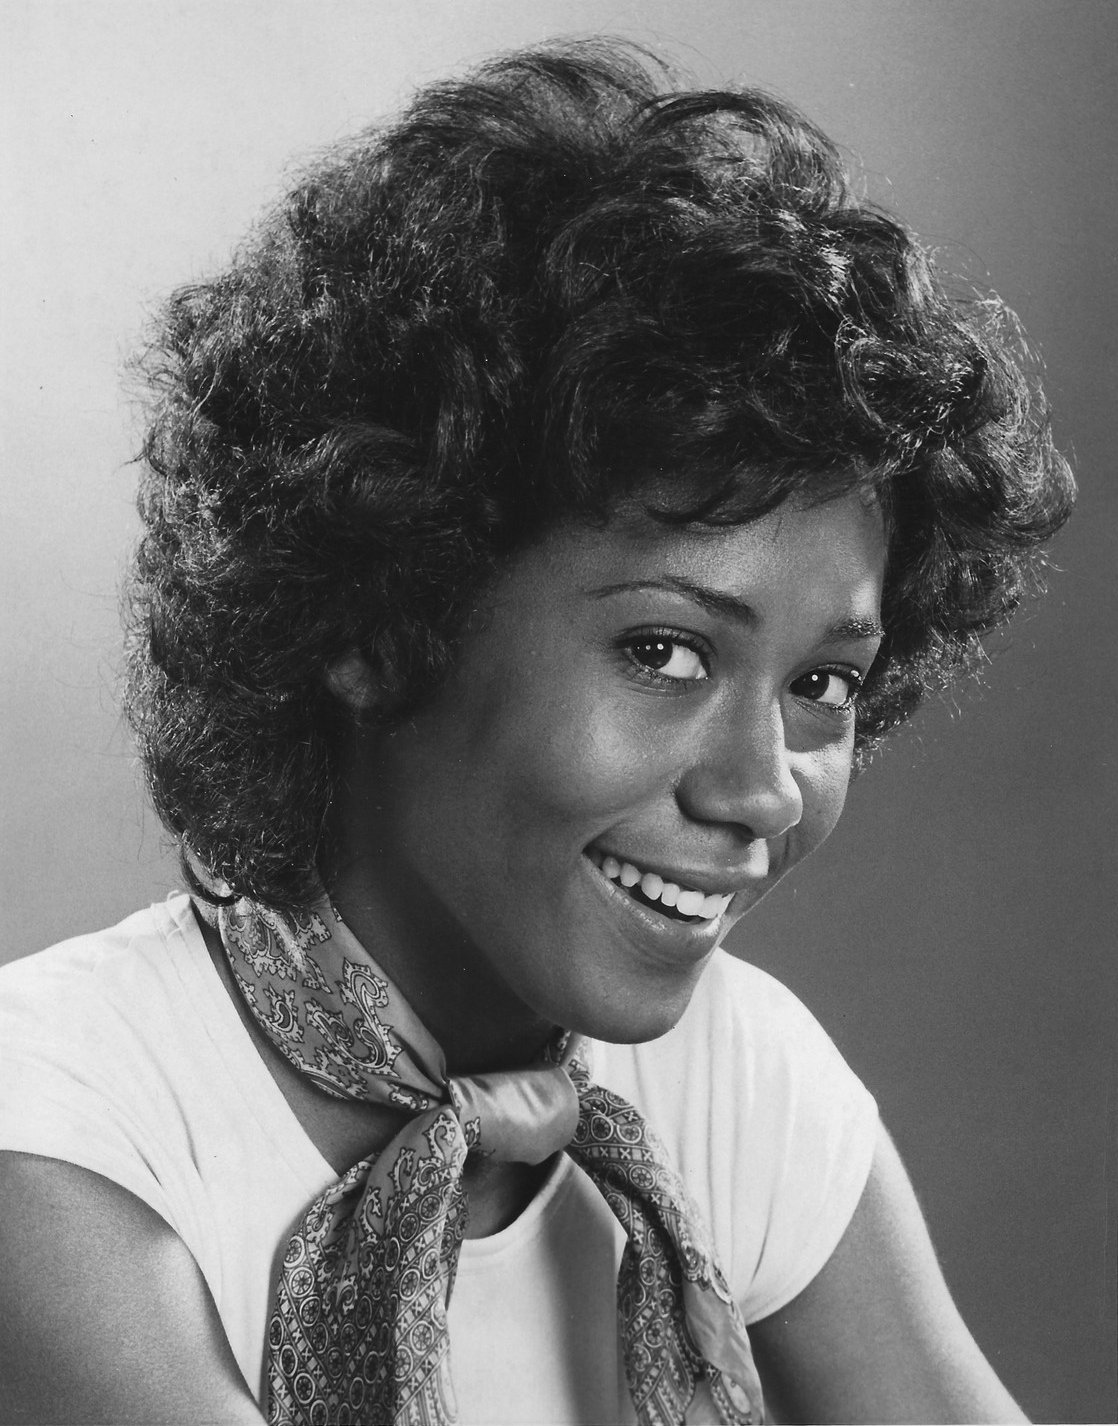 Black and white promotional portrait of Berlinda Tolbert in 1975 | Photo: Wikimedia Commons Images, Public Domain